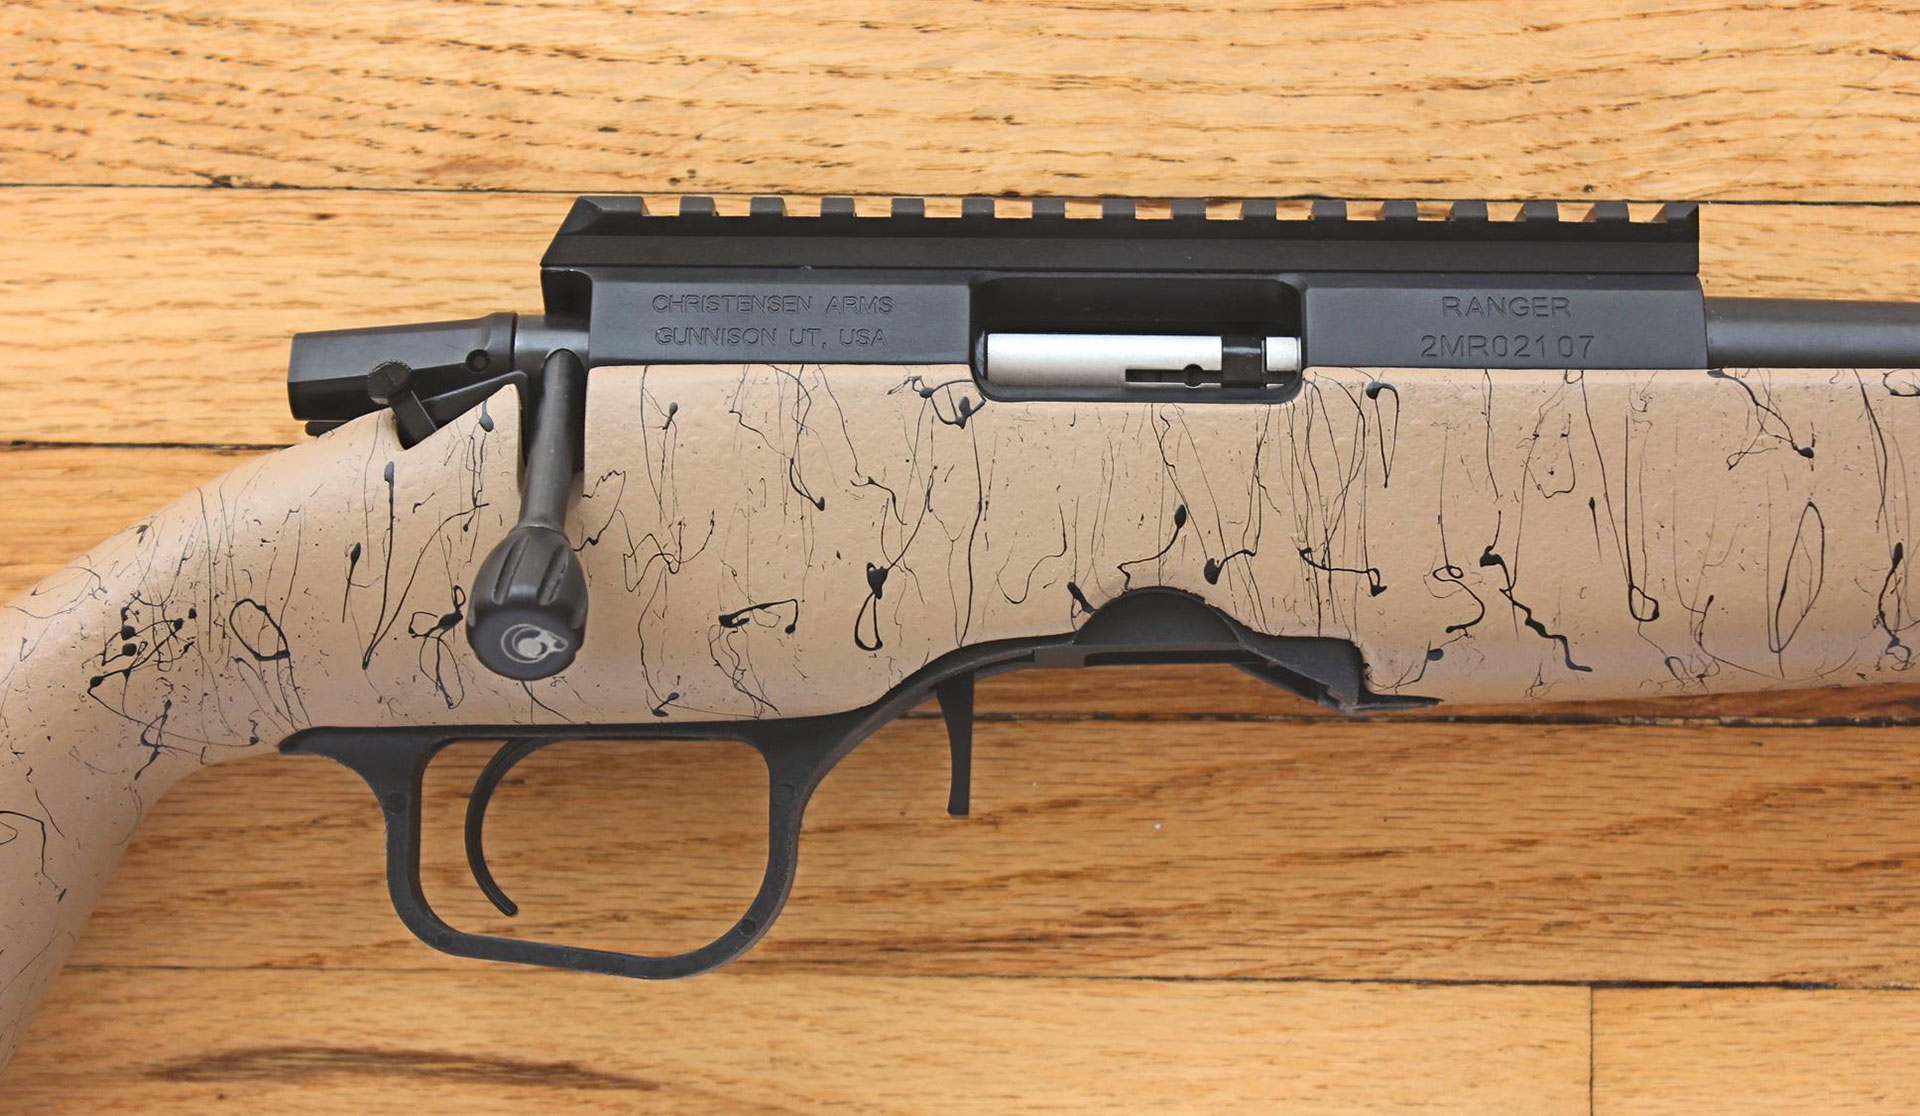 The bolt operation and trigger are Remington 700 pattern components while the extended magazine release and magazine are borrowed from the Ruger 10/22.